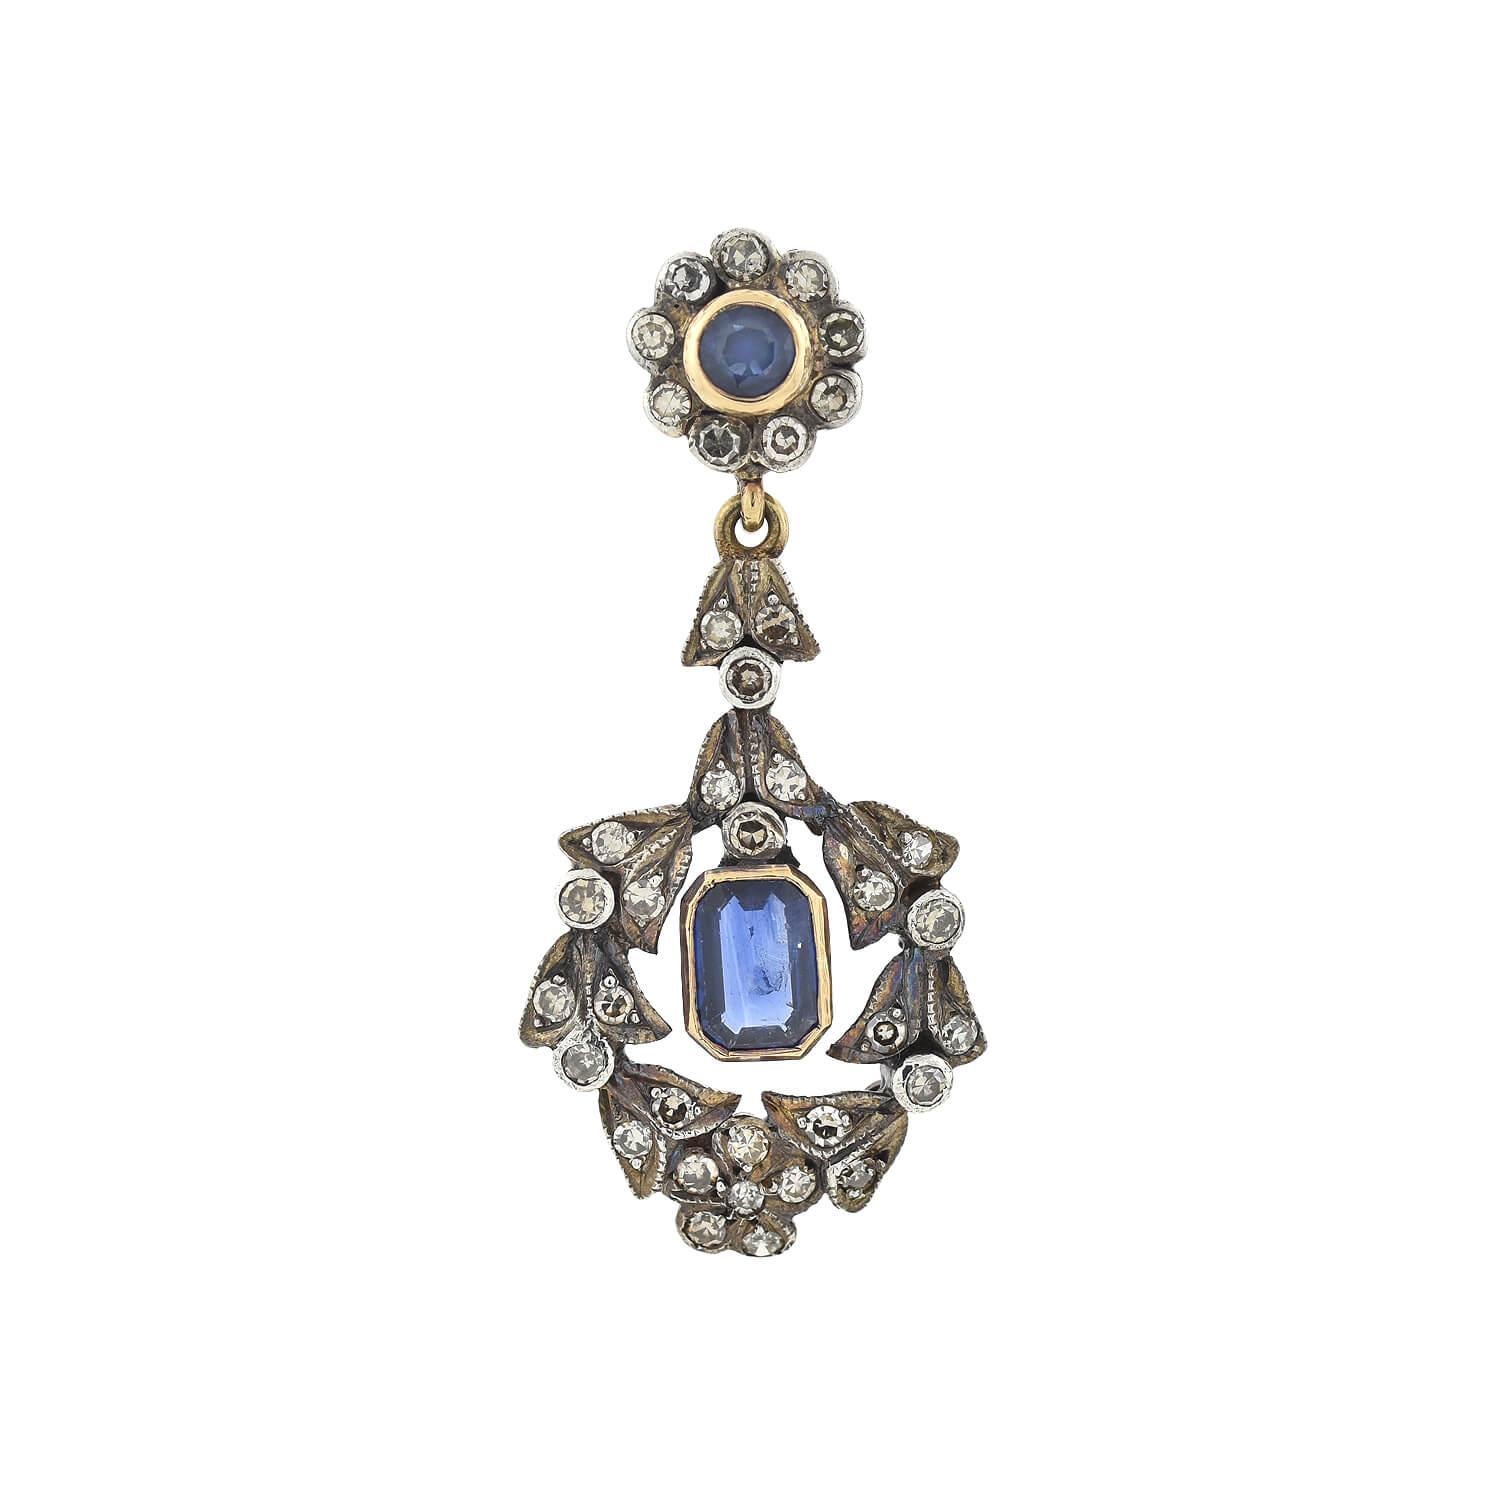 A gorgeous pair of diamond and sapphire earrings from the Victorian (ca1880s) era! Crafted in 18kt yellow gold and topped in sterling silver, these lovely earrings begin with a Round Cut sapphire in a yellow gold bezel surrounded by nine Single Cut